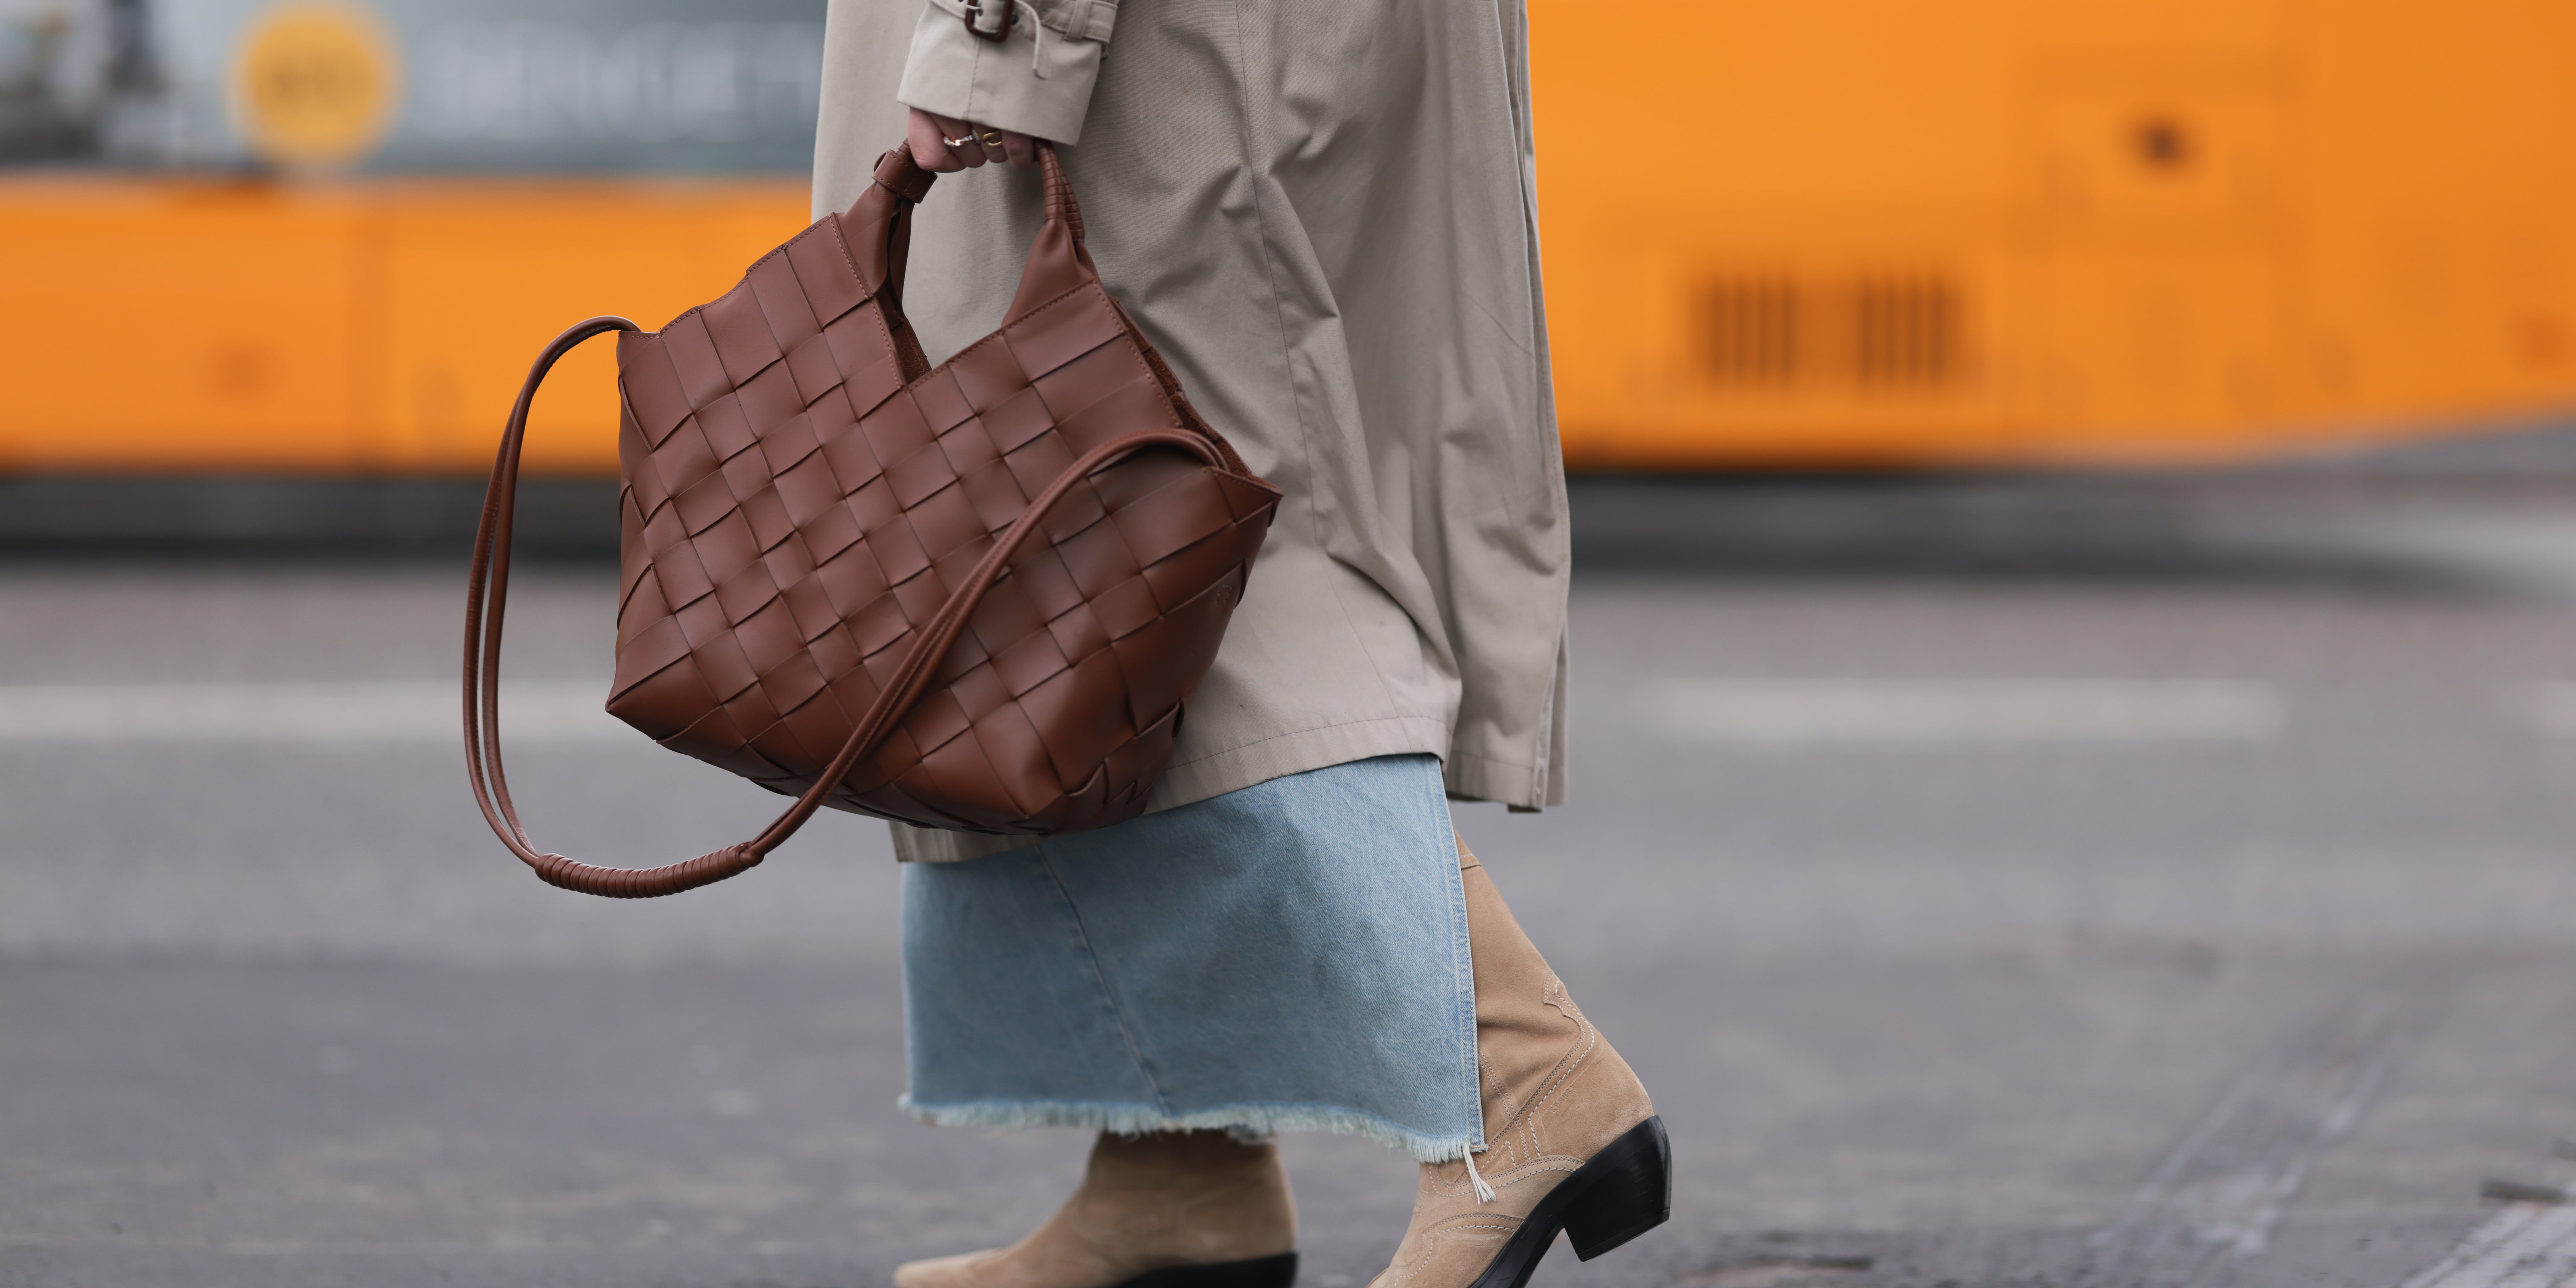 COULD THIS BE THE SEASON'S 'IT' BAG? - Buro 24/7